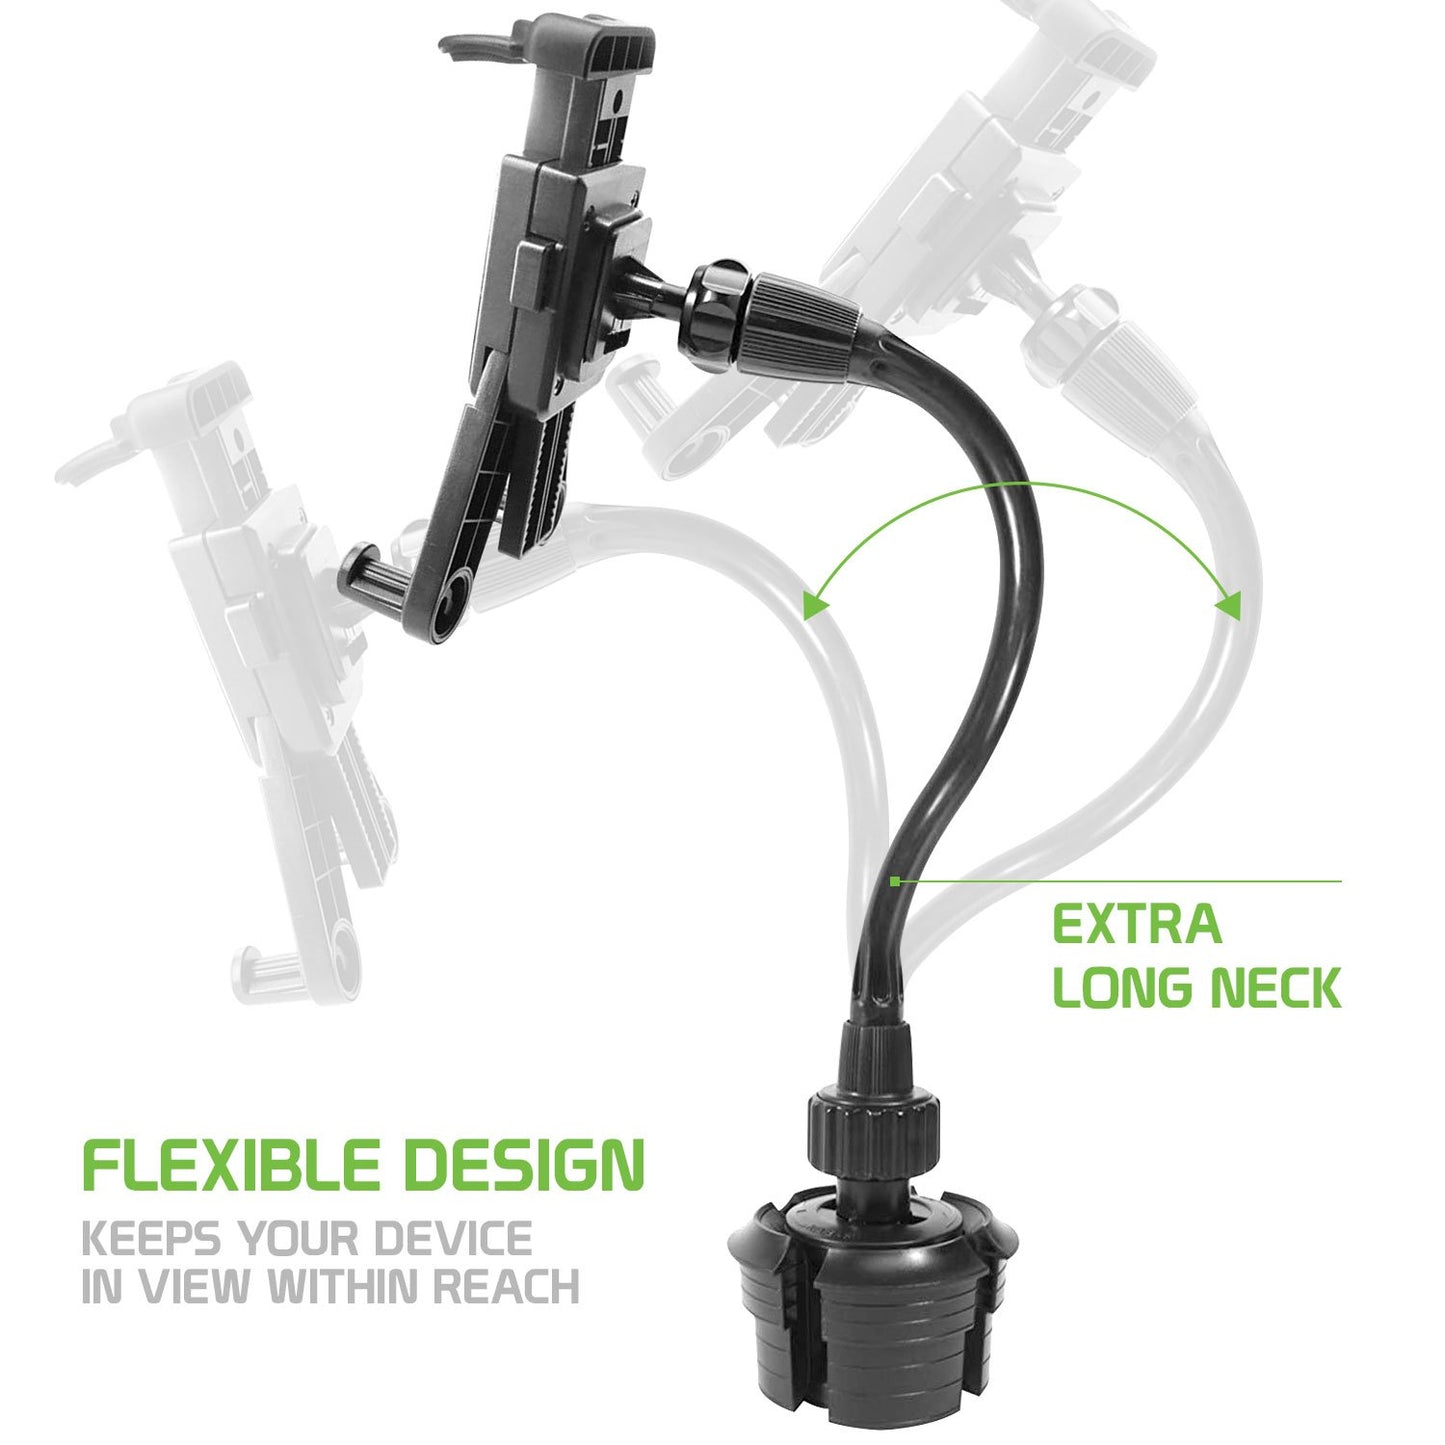 PH670G - Heavy Duty Tablet Mount, Cup Holder Mount with Flexible Gooseneck and 360 Degree Rotation for Tablets by Cellet